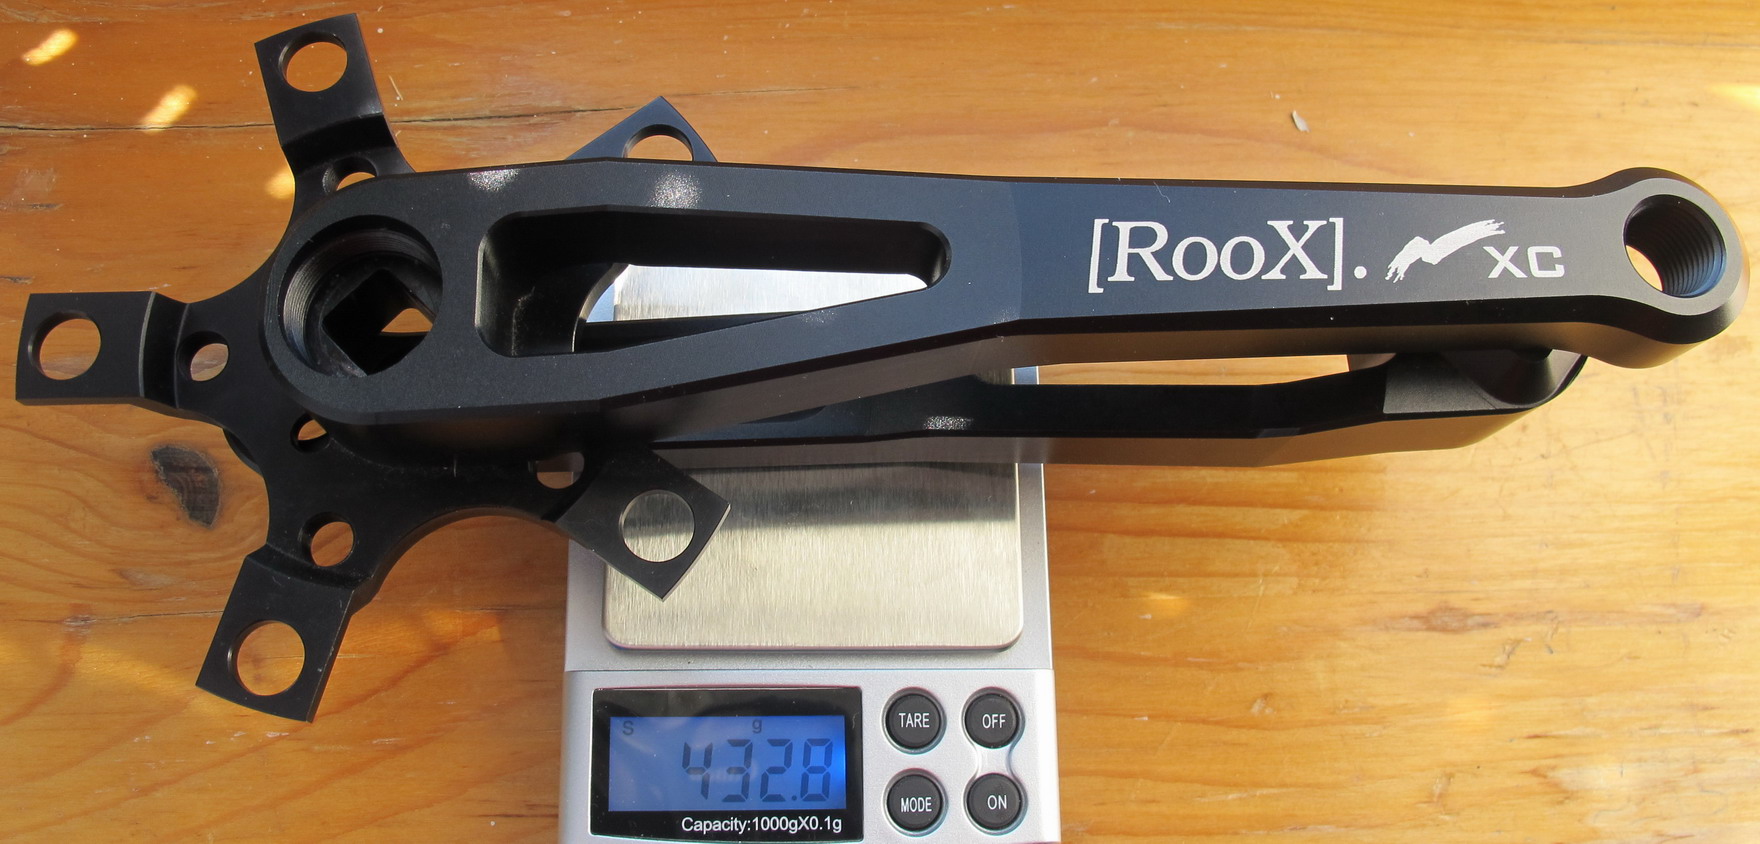 Roox xc bcd 94-58,175mm small